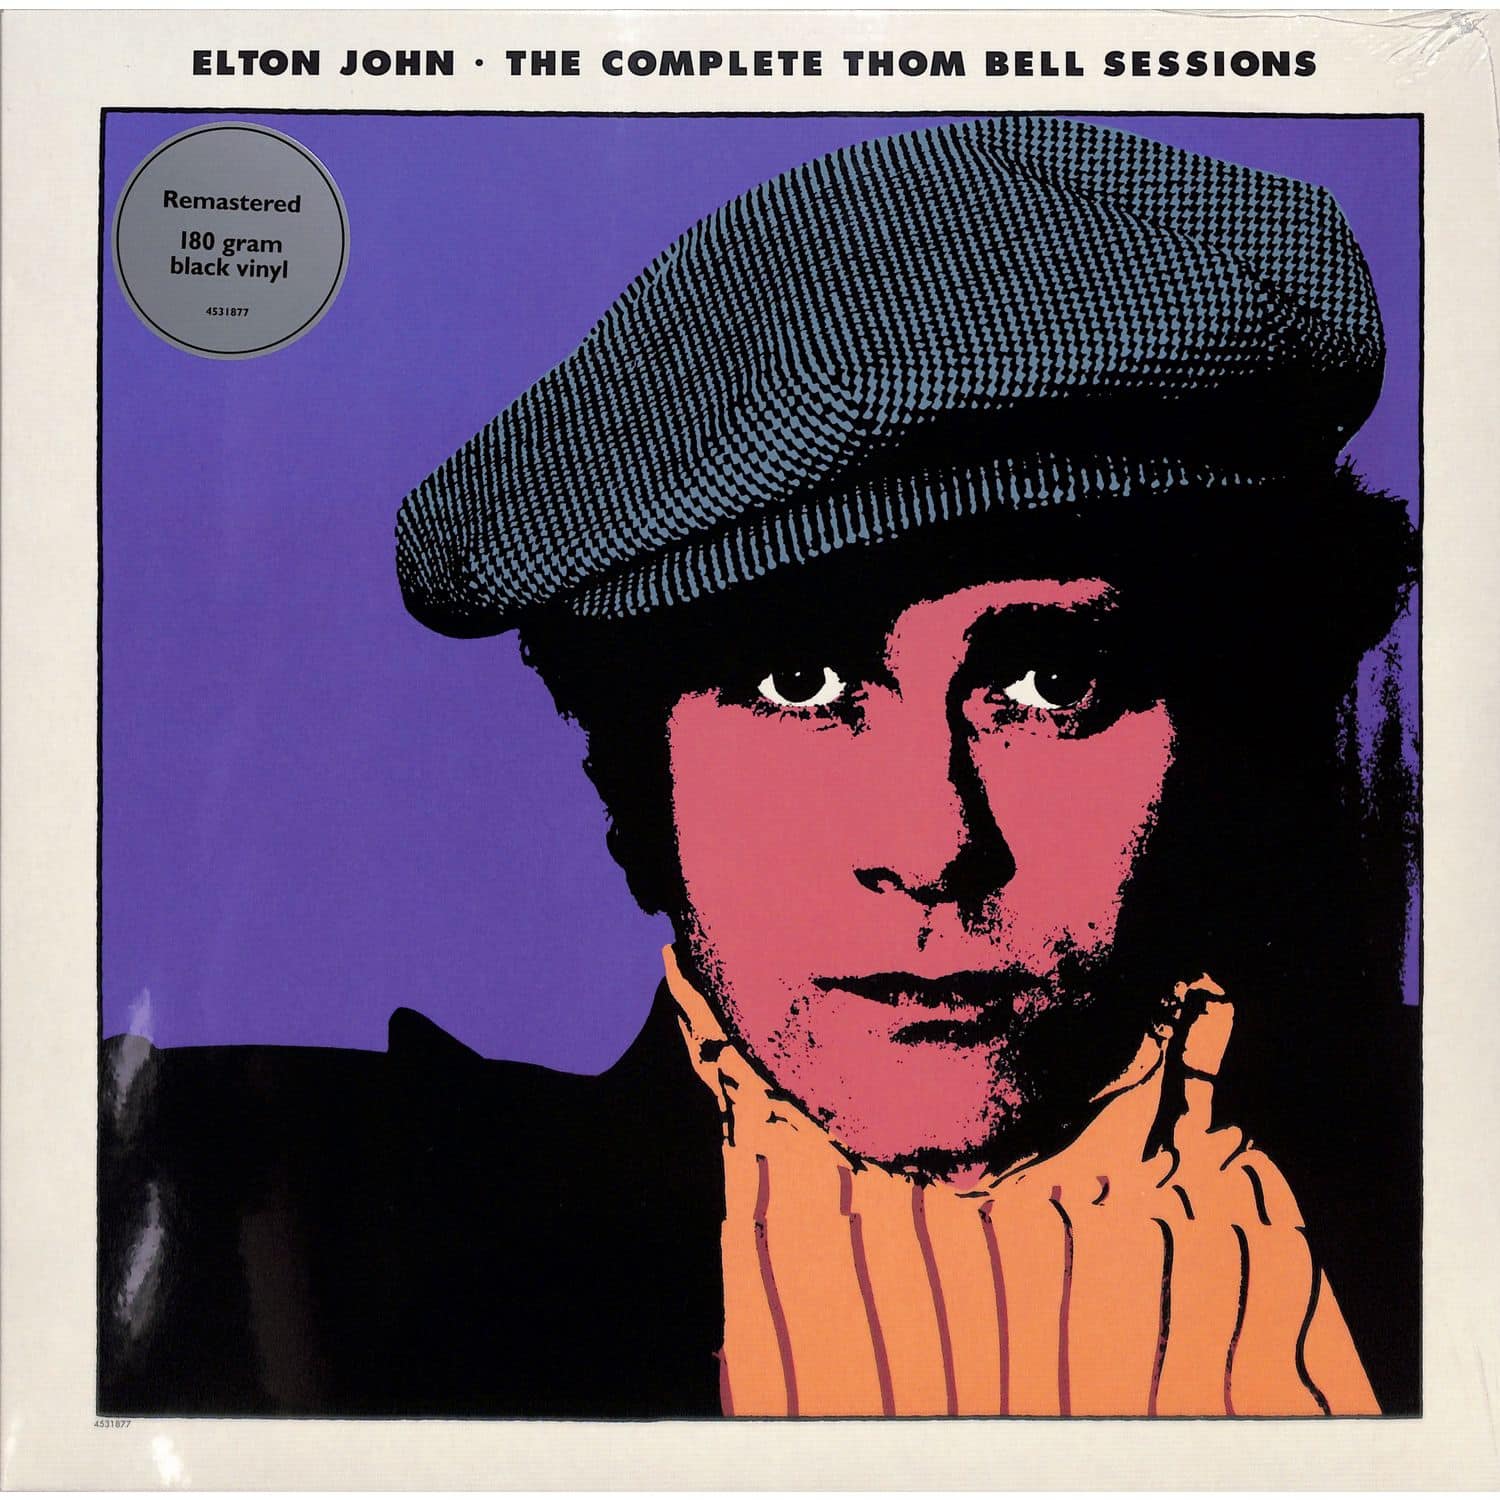 Elton John - THE COMPLETE THOM BELL SESSIONS 